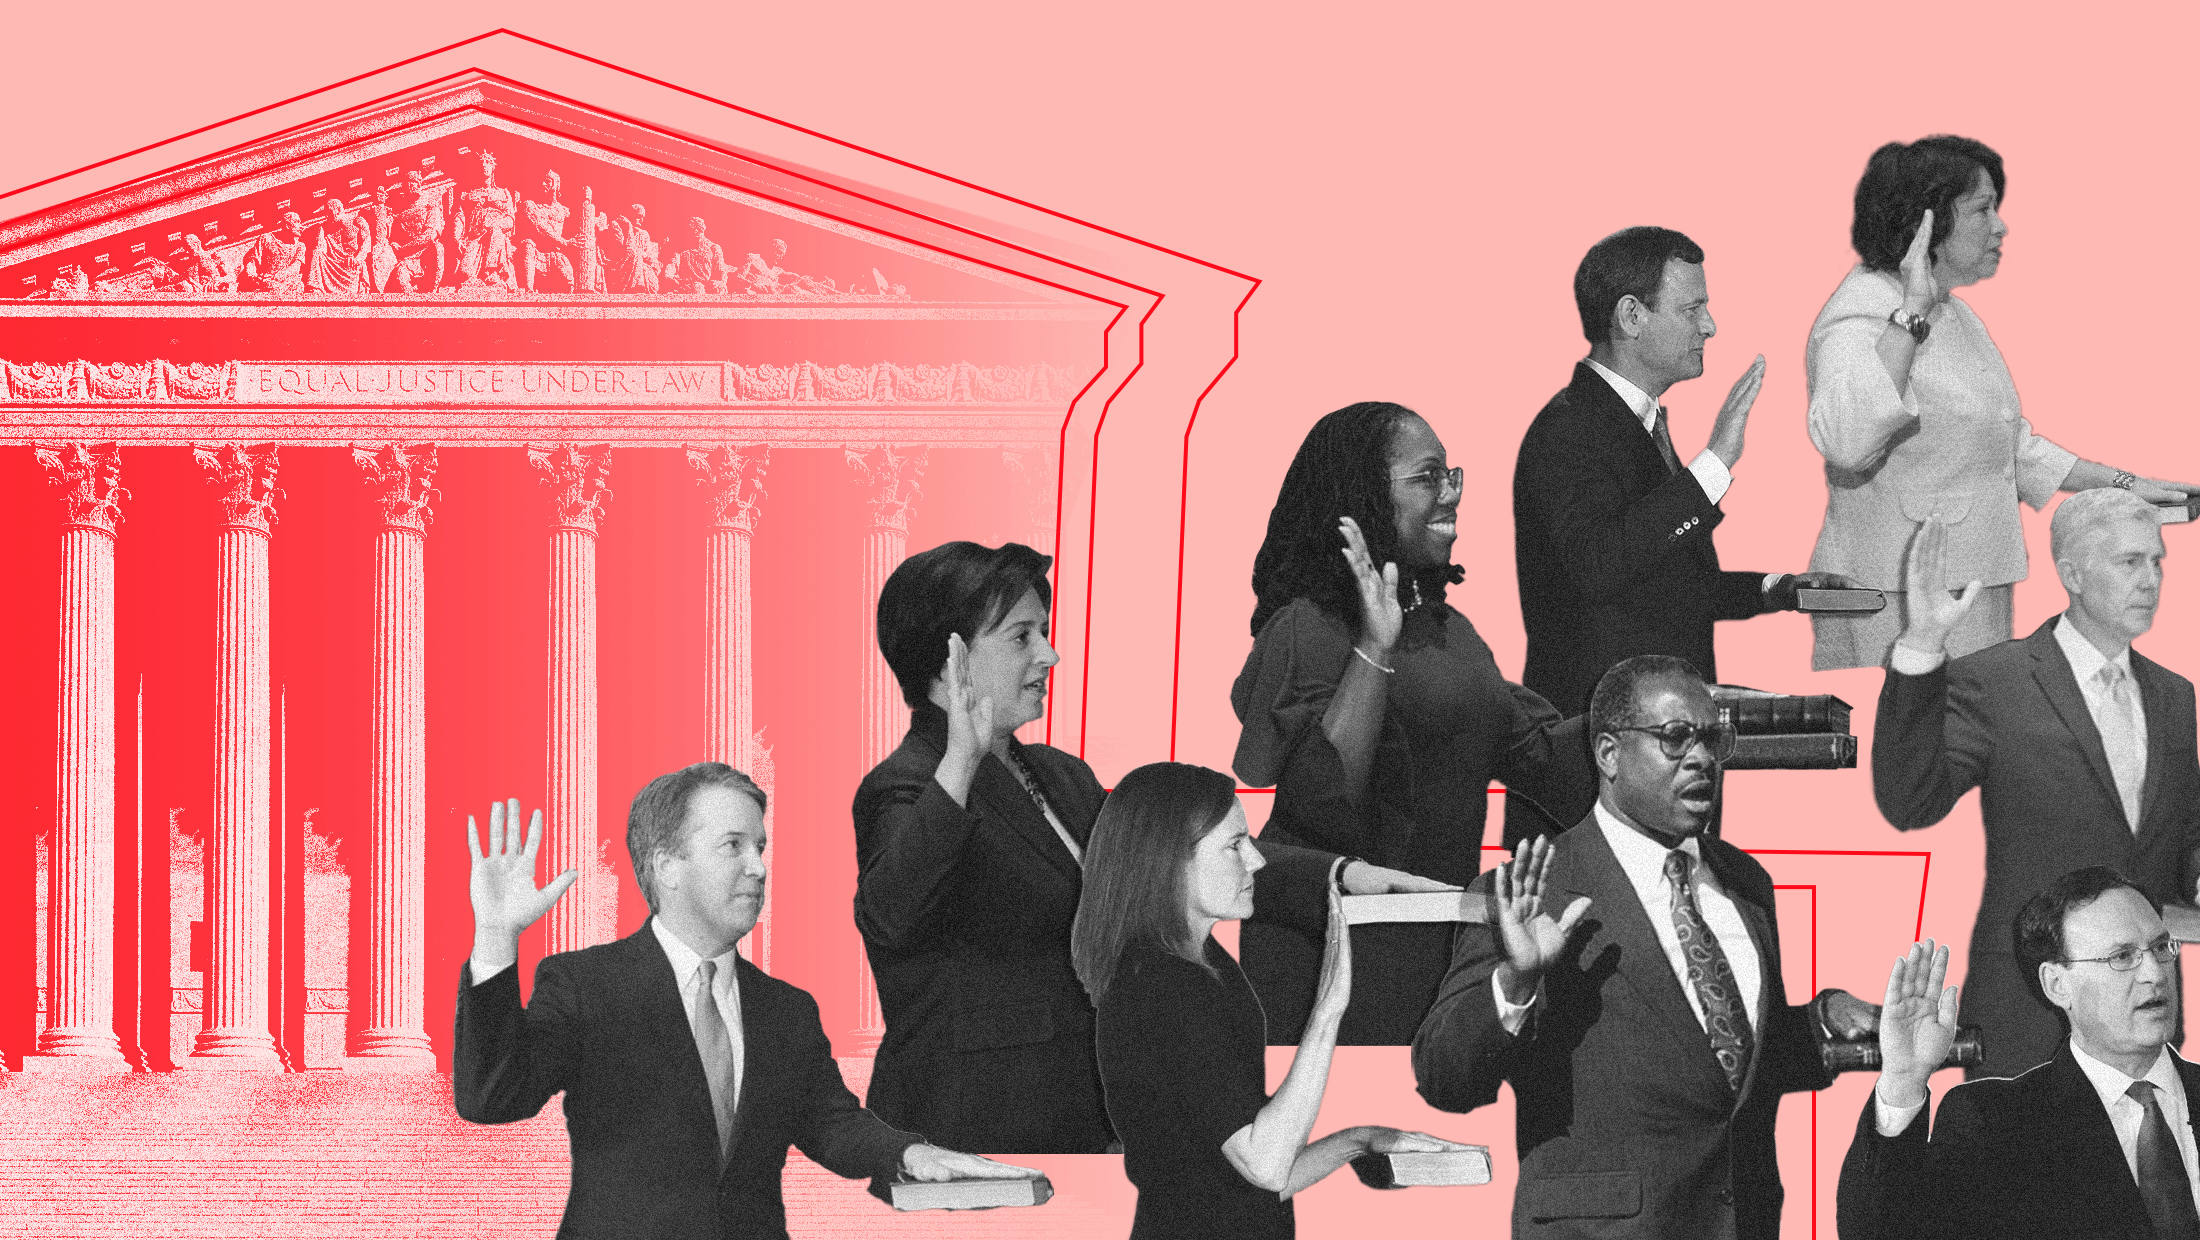 Pink background with red toned U.S. Supreme Court and all nine justices toned in black and white and holding their hands up from left to right: Brett Kavanaugh, Elena Kagan, Amy Coney Barrett, Ketanji Brown Jackson, Clarence Thomas, John Roberts, Sonia Sotomayor, Neil Gorsuch and Samuel Alito.